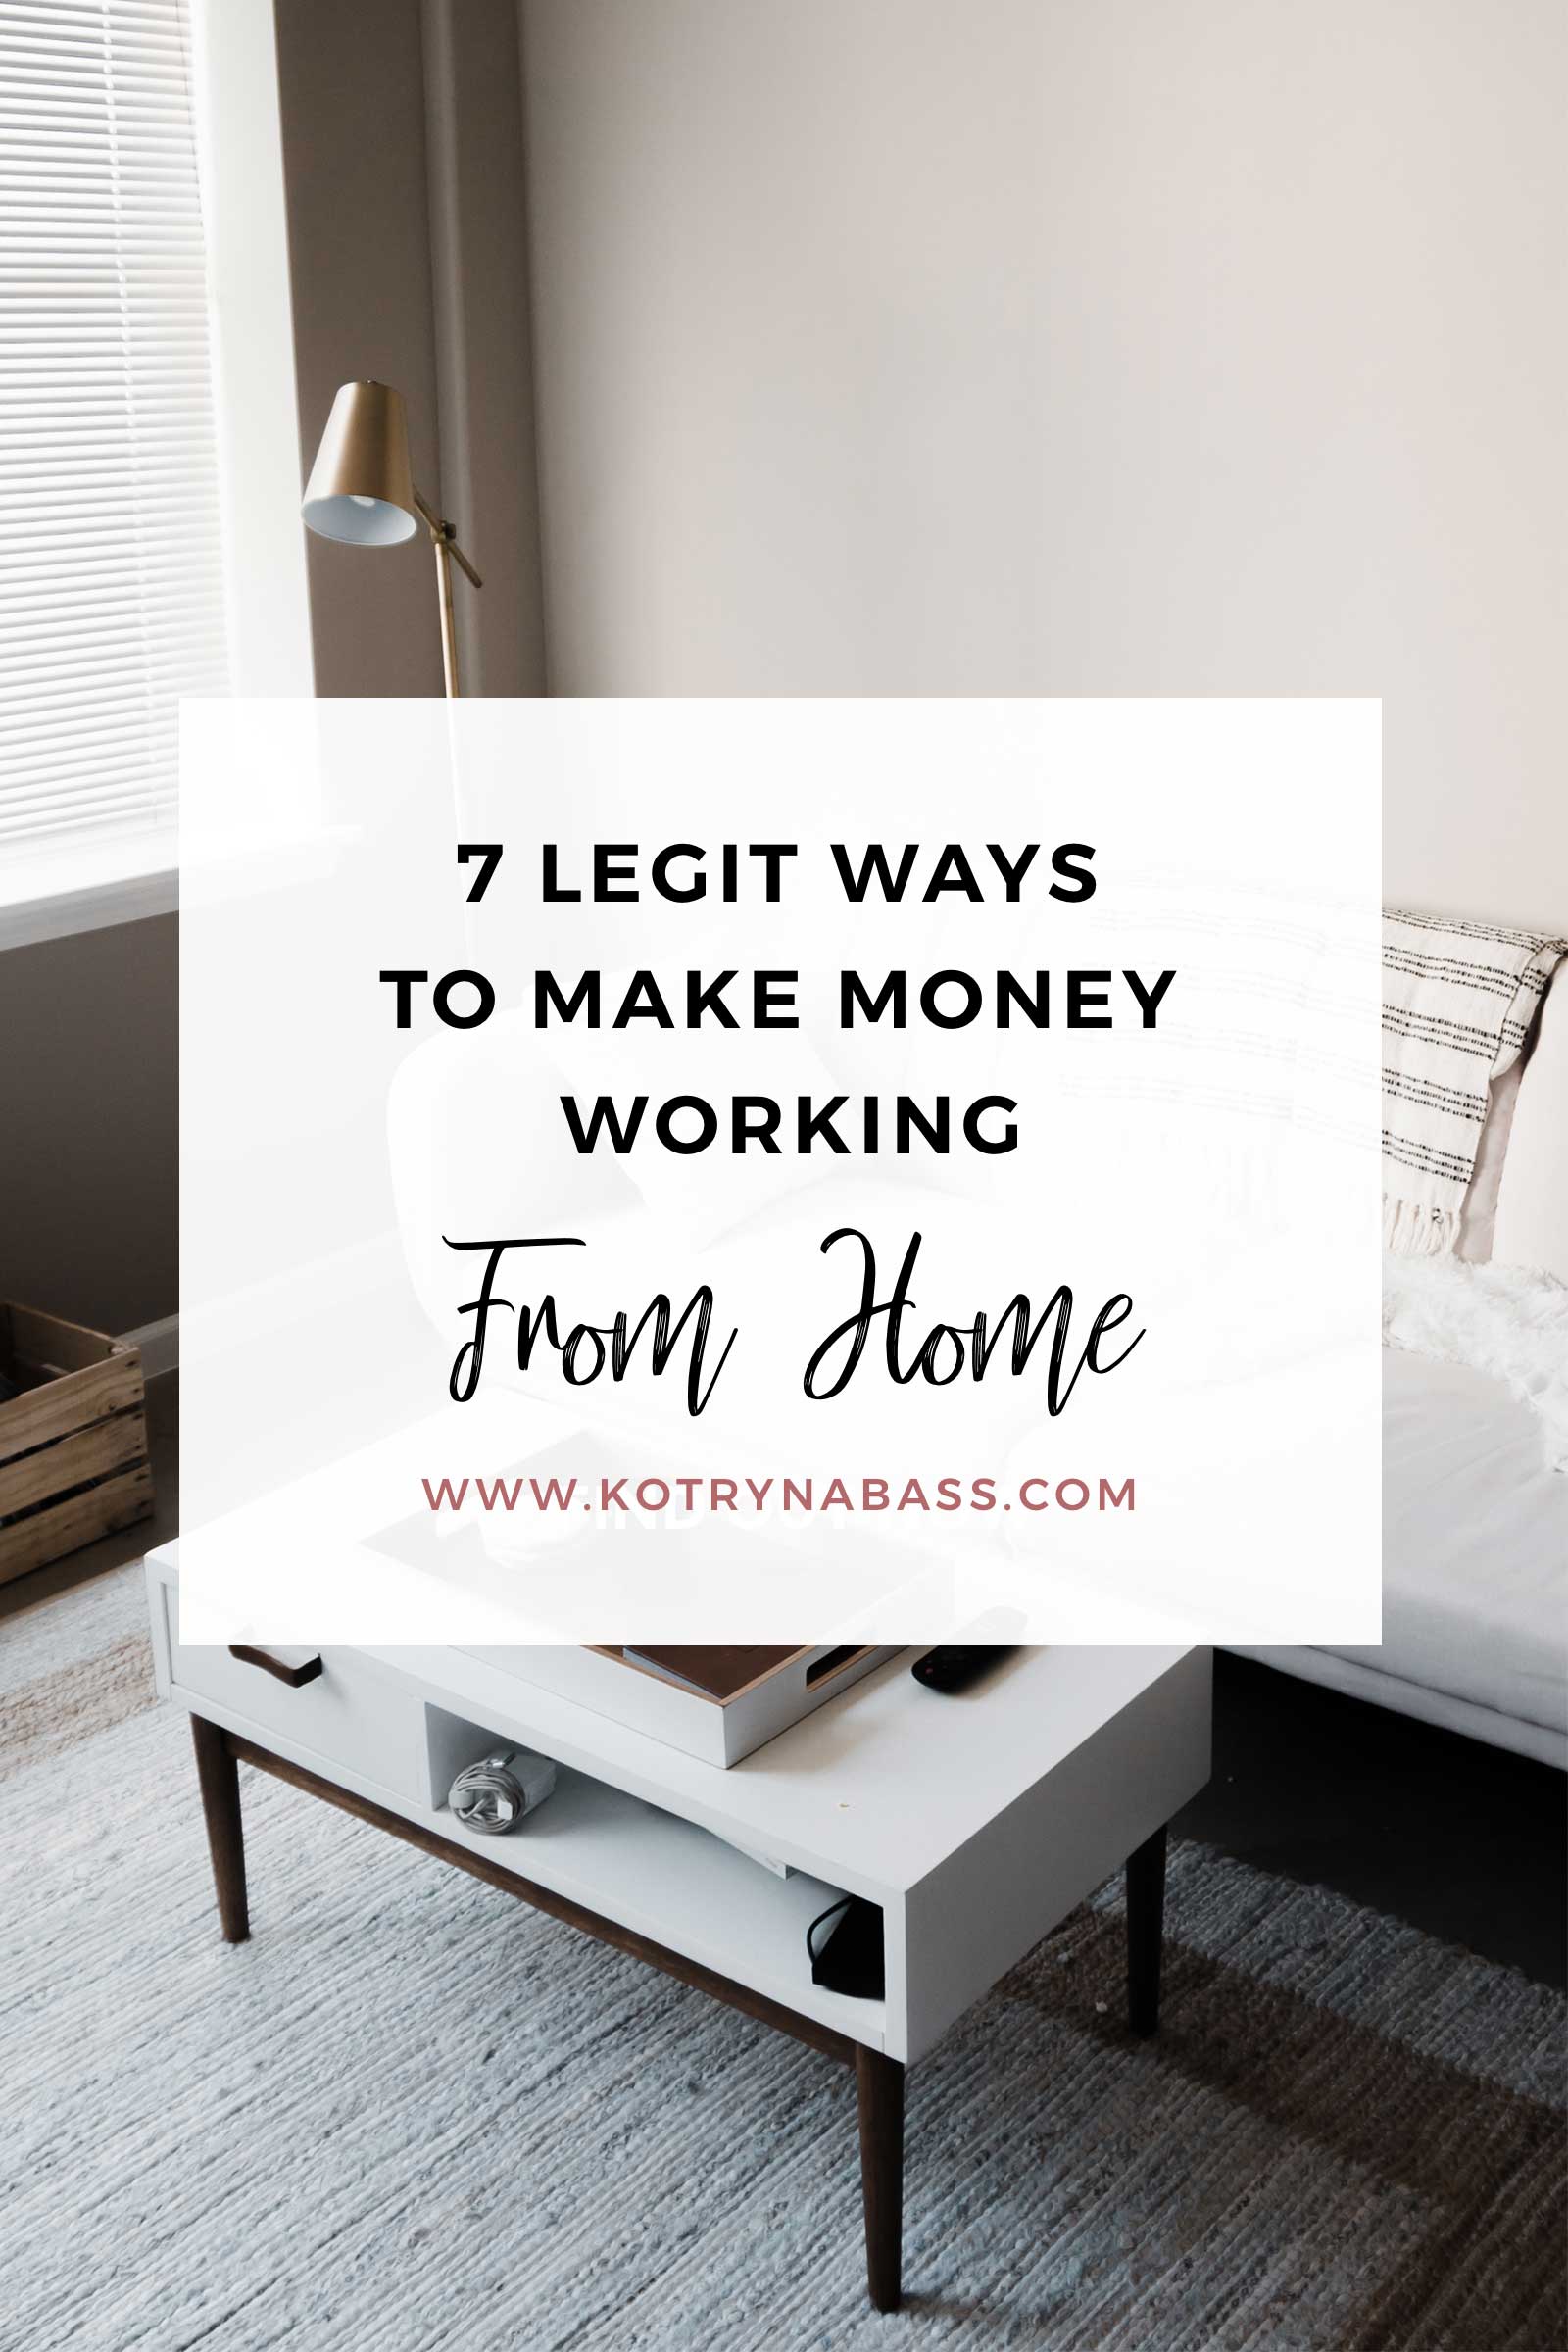 I've been working from home for over 5 years now and I wouldn't have it any other ways! If you wish to run a business from the comfort of your own home, here are 7 legit ways to make money from home.